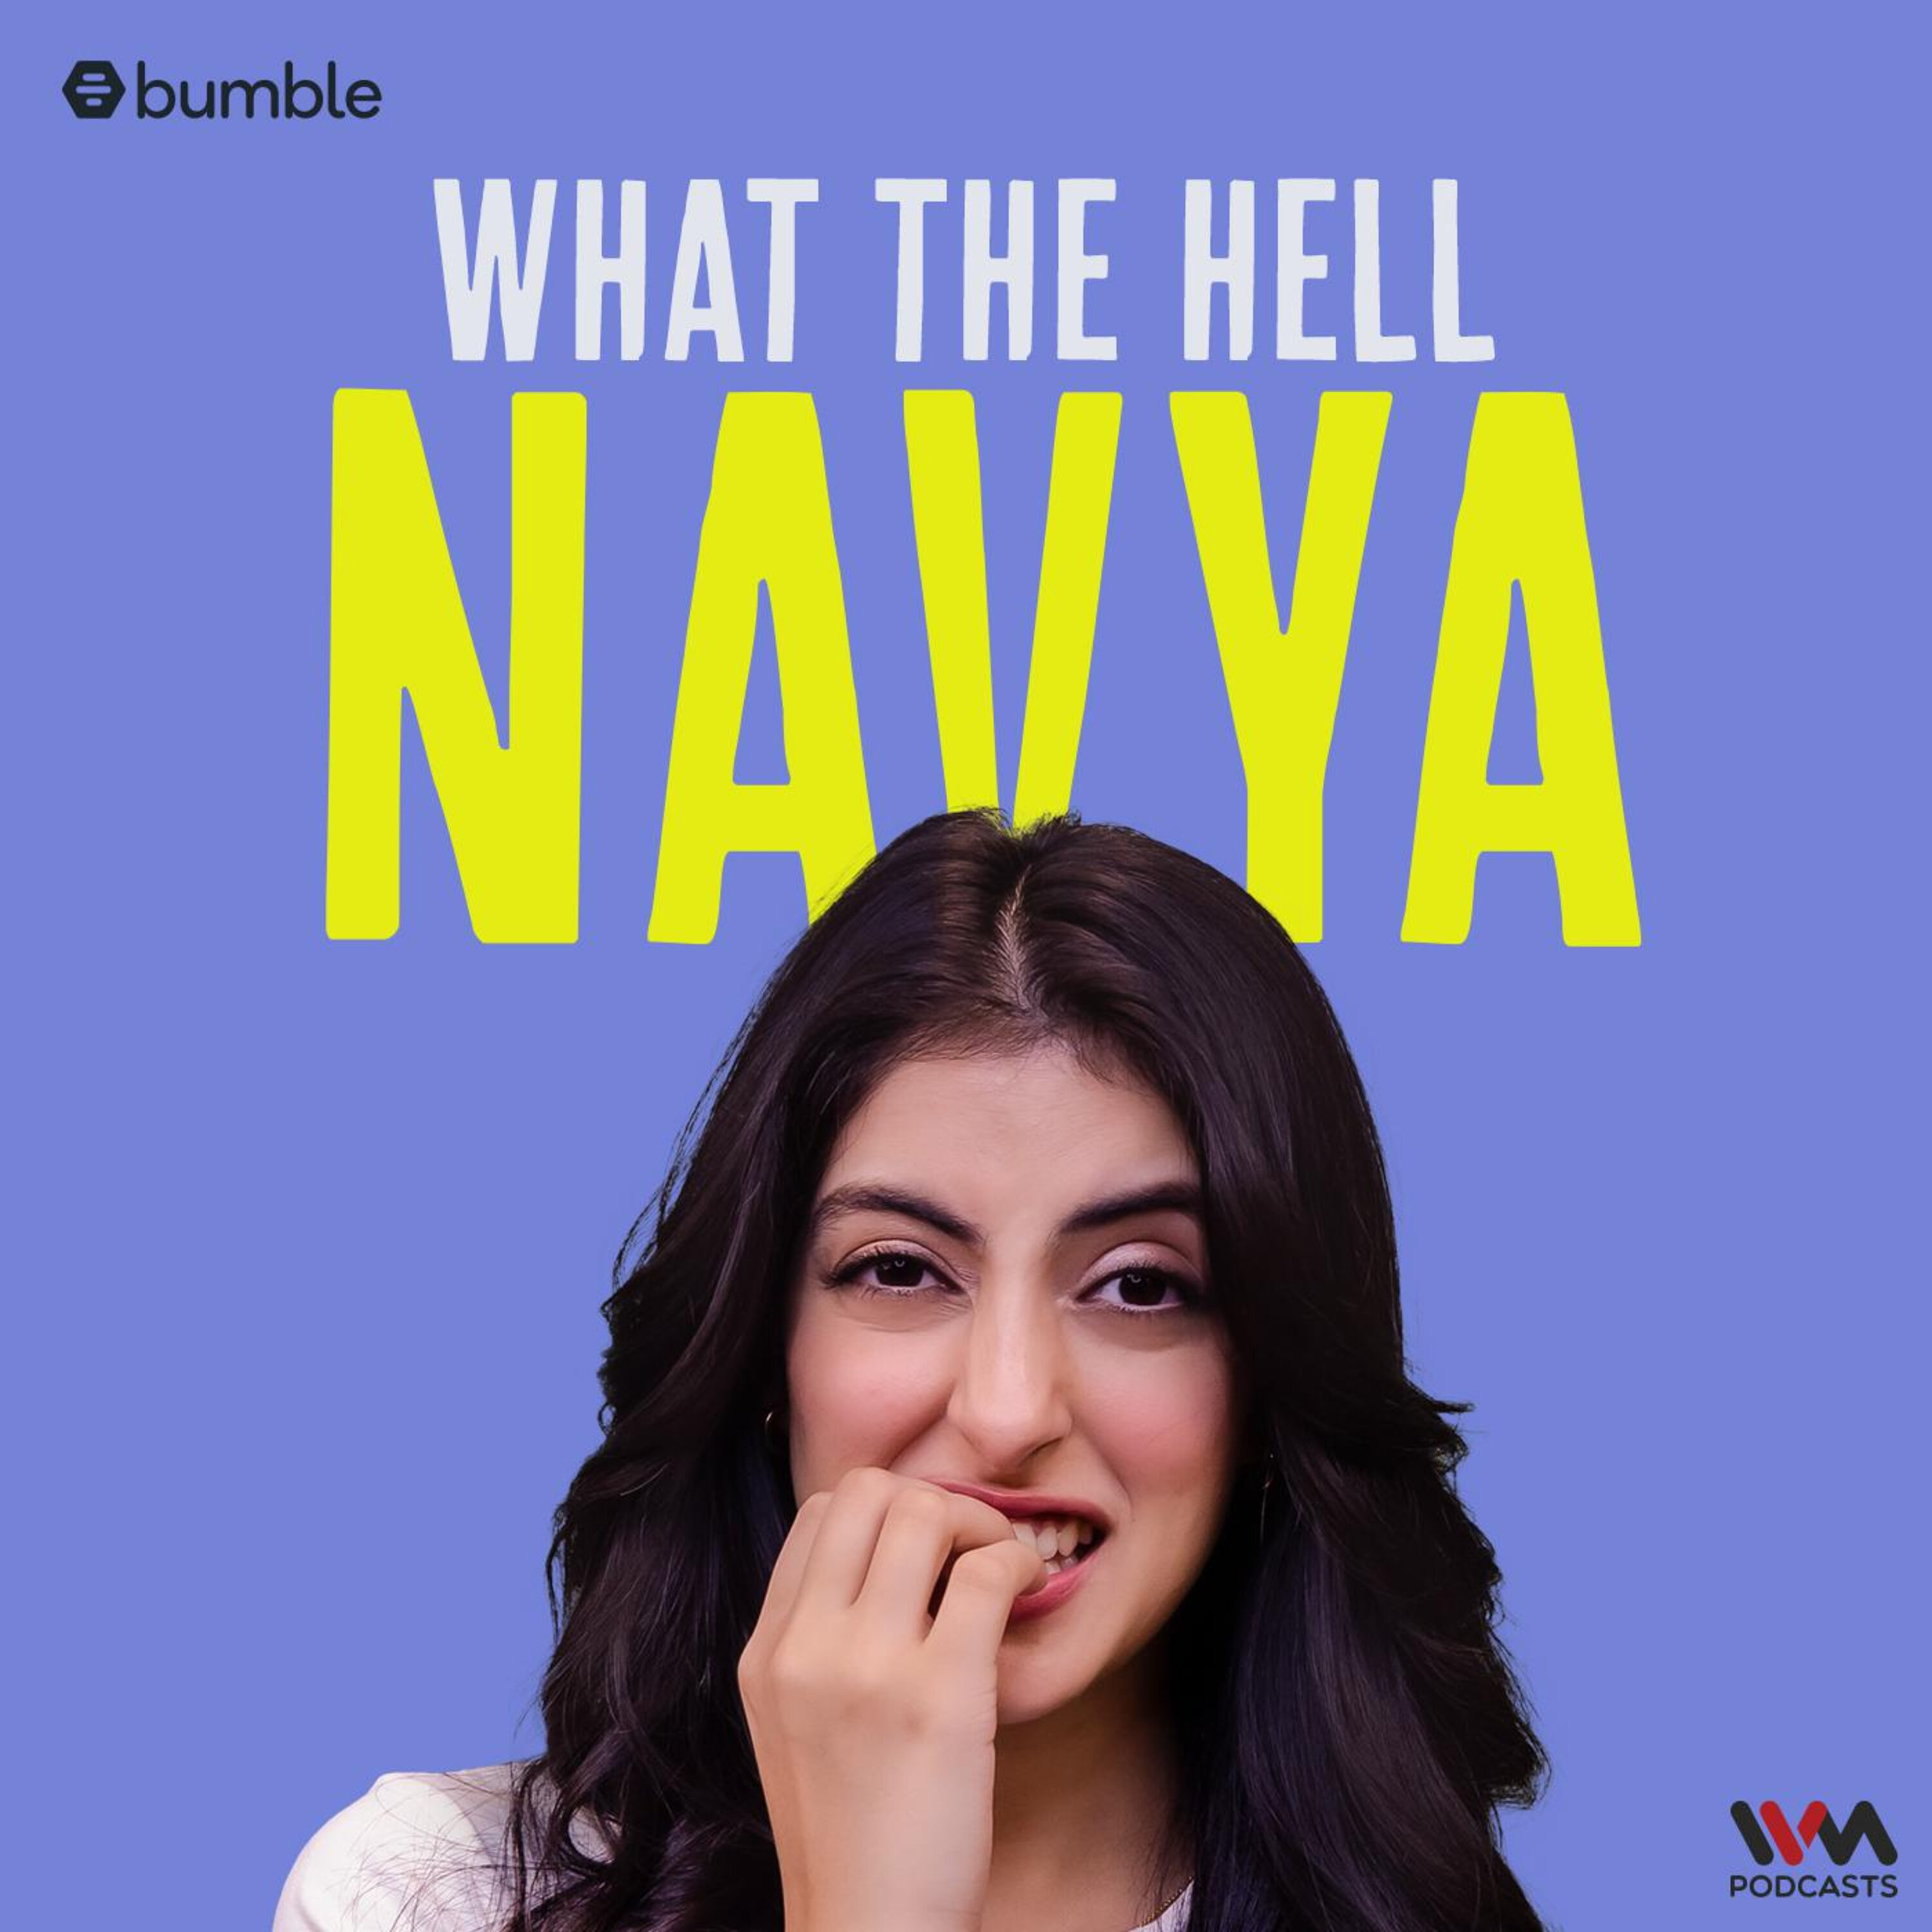 What The Hell Navya podcast show image